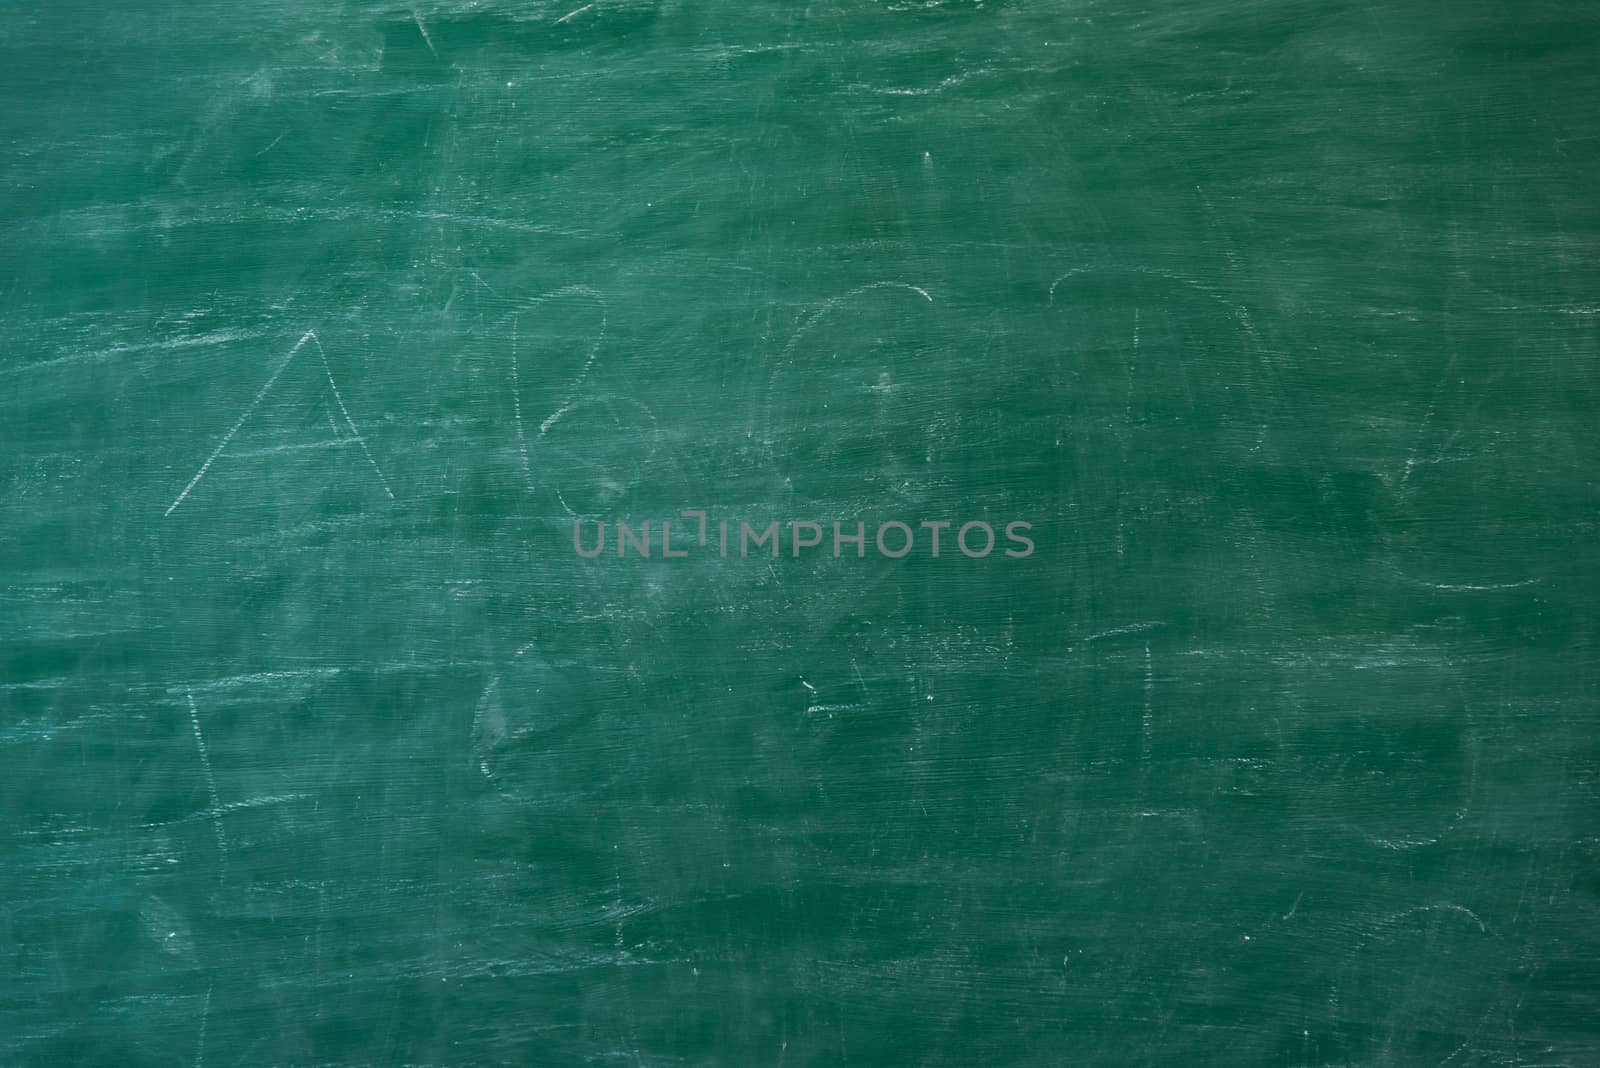 Abstract of Blank Green Blackboard or chalkboard texture background with white chalk rubbed write already empty blank copy space and nobody, School education learning concept